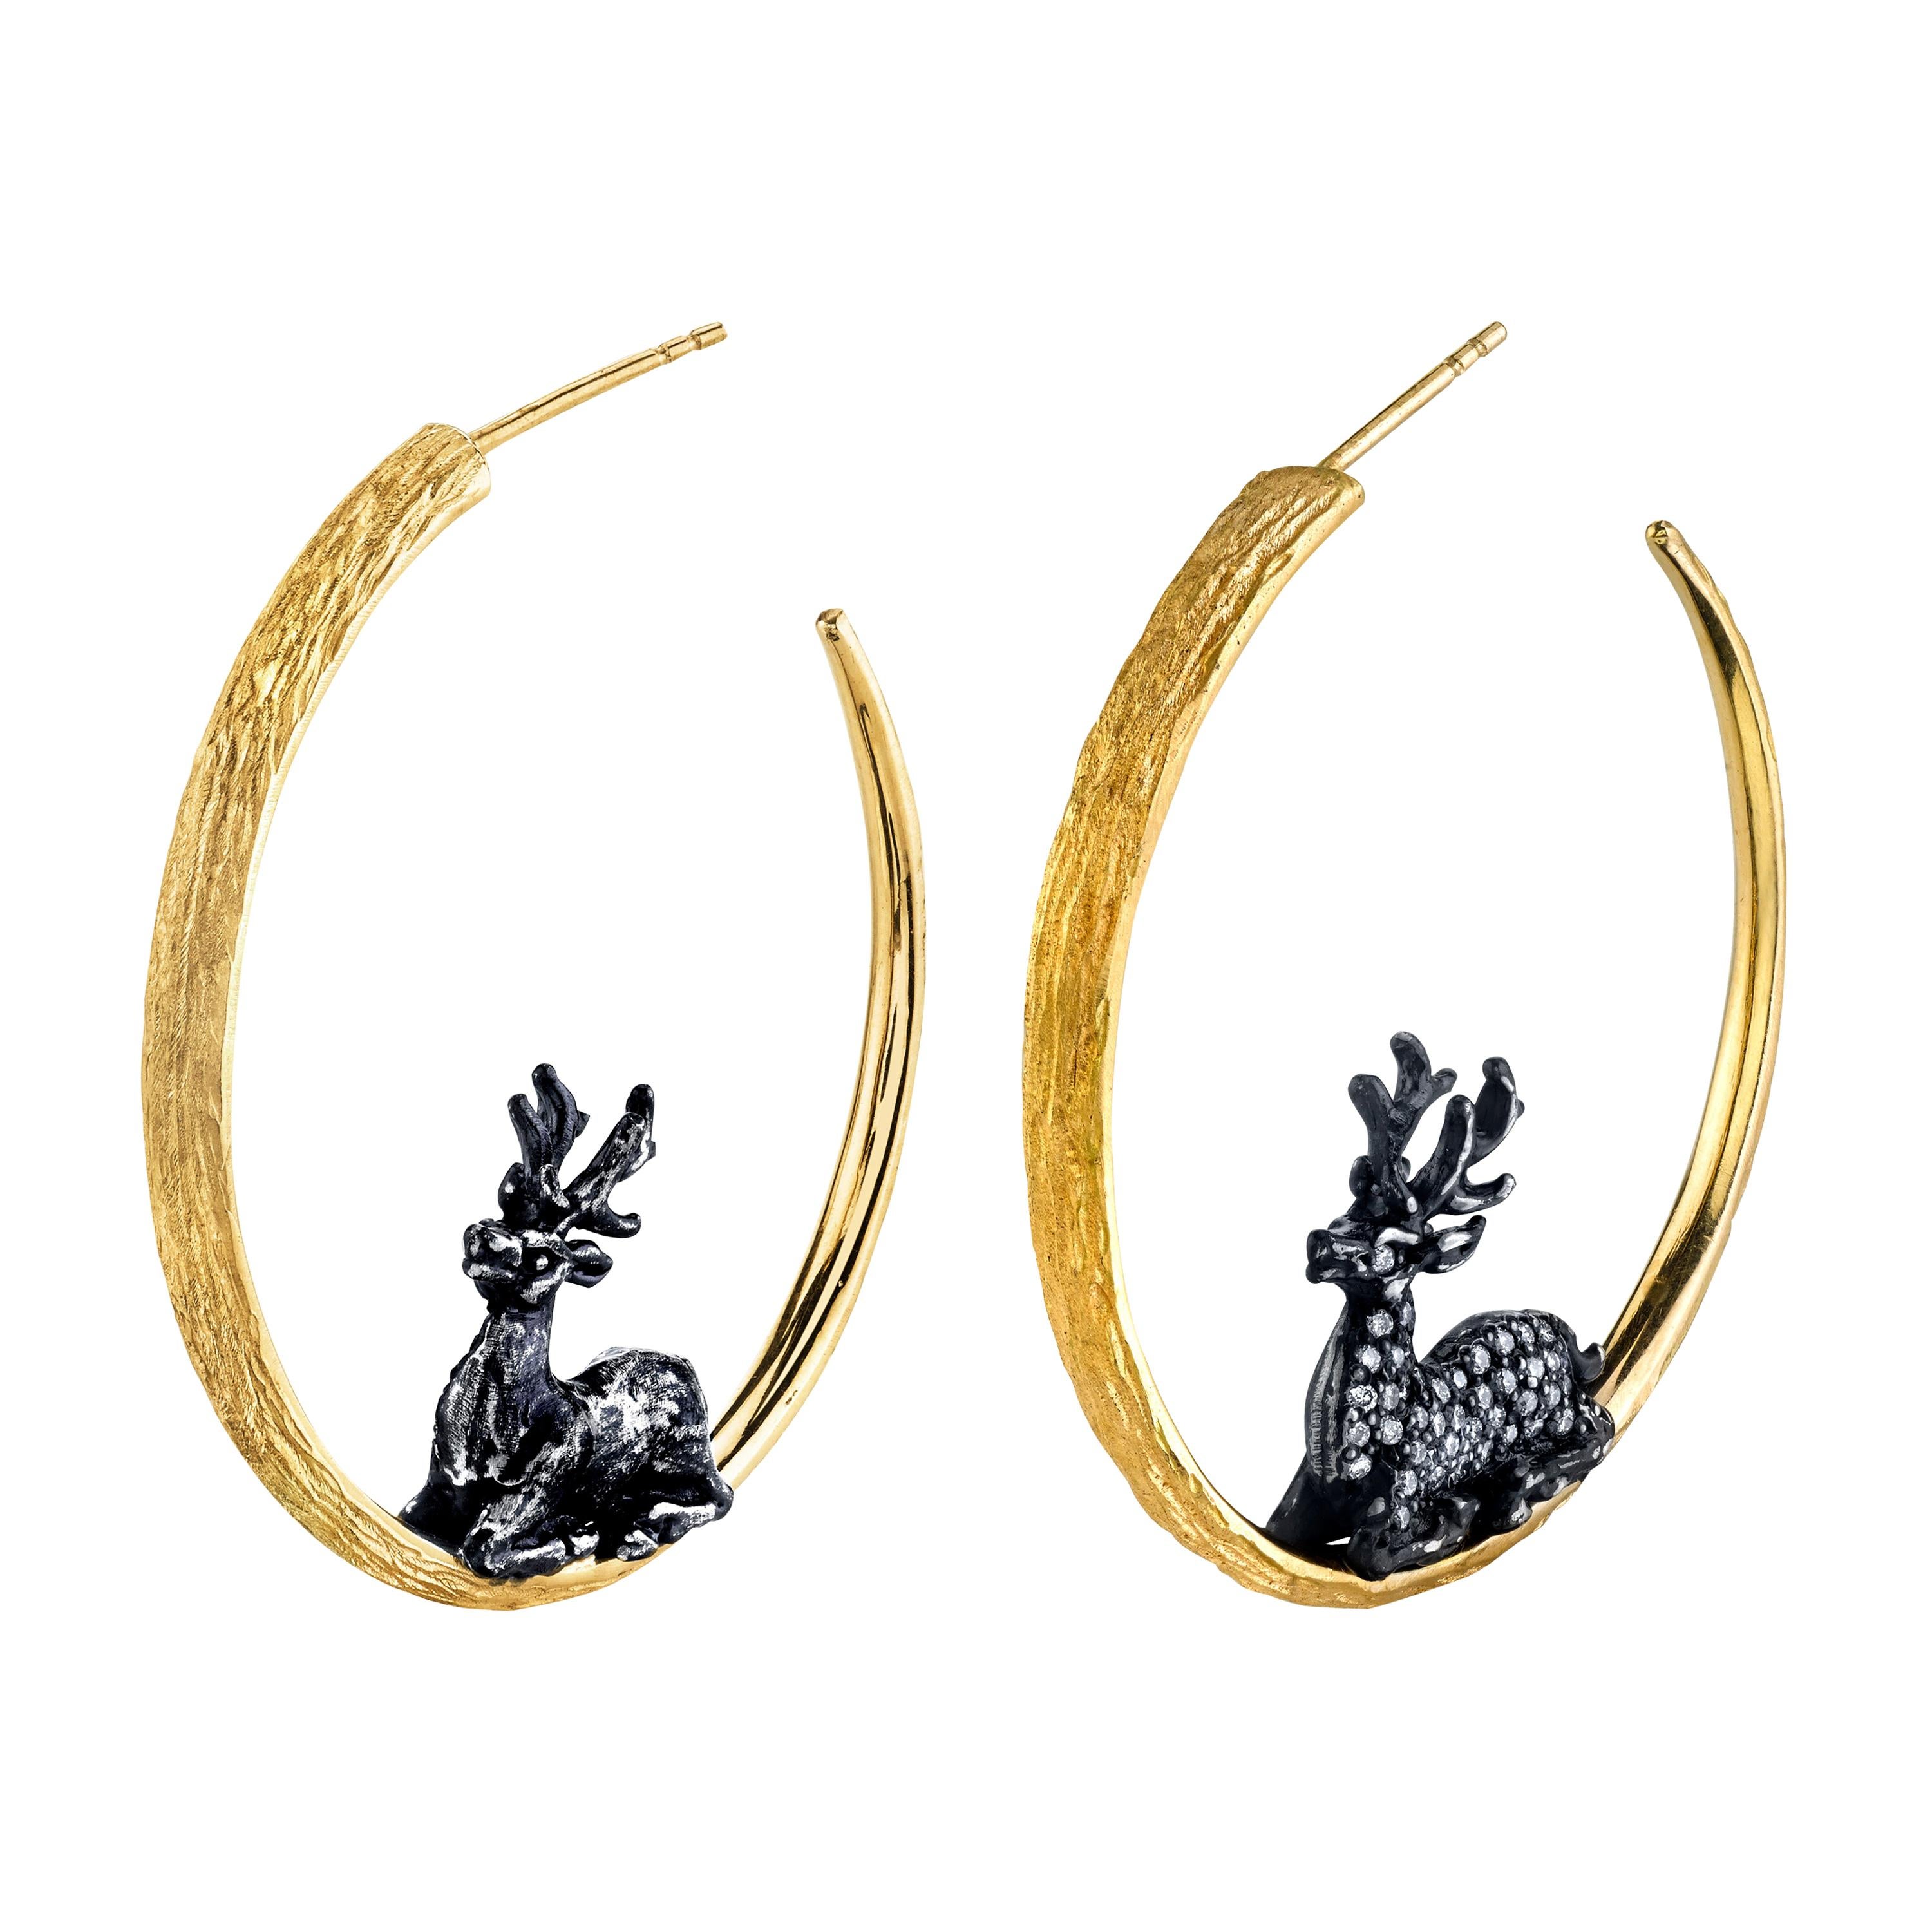 Stag Hoop Earrings with 18k Gold and Oxidized Silver For Sale